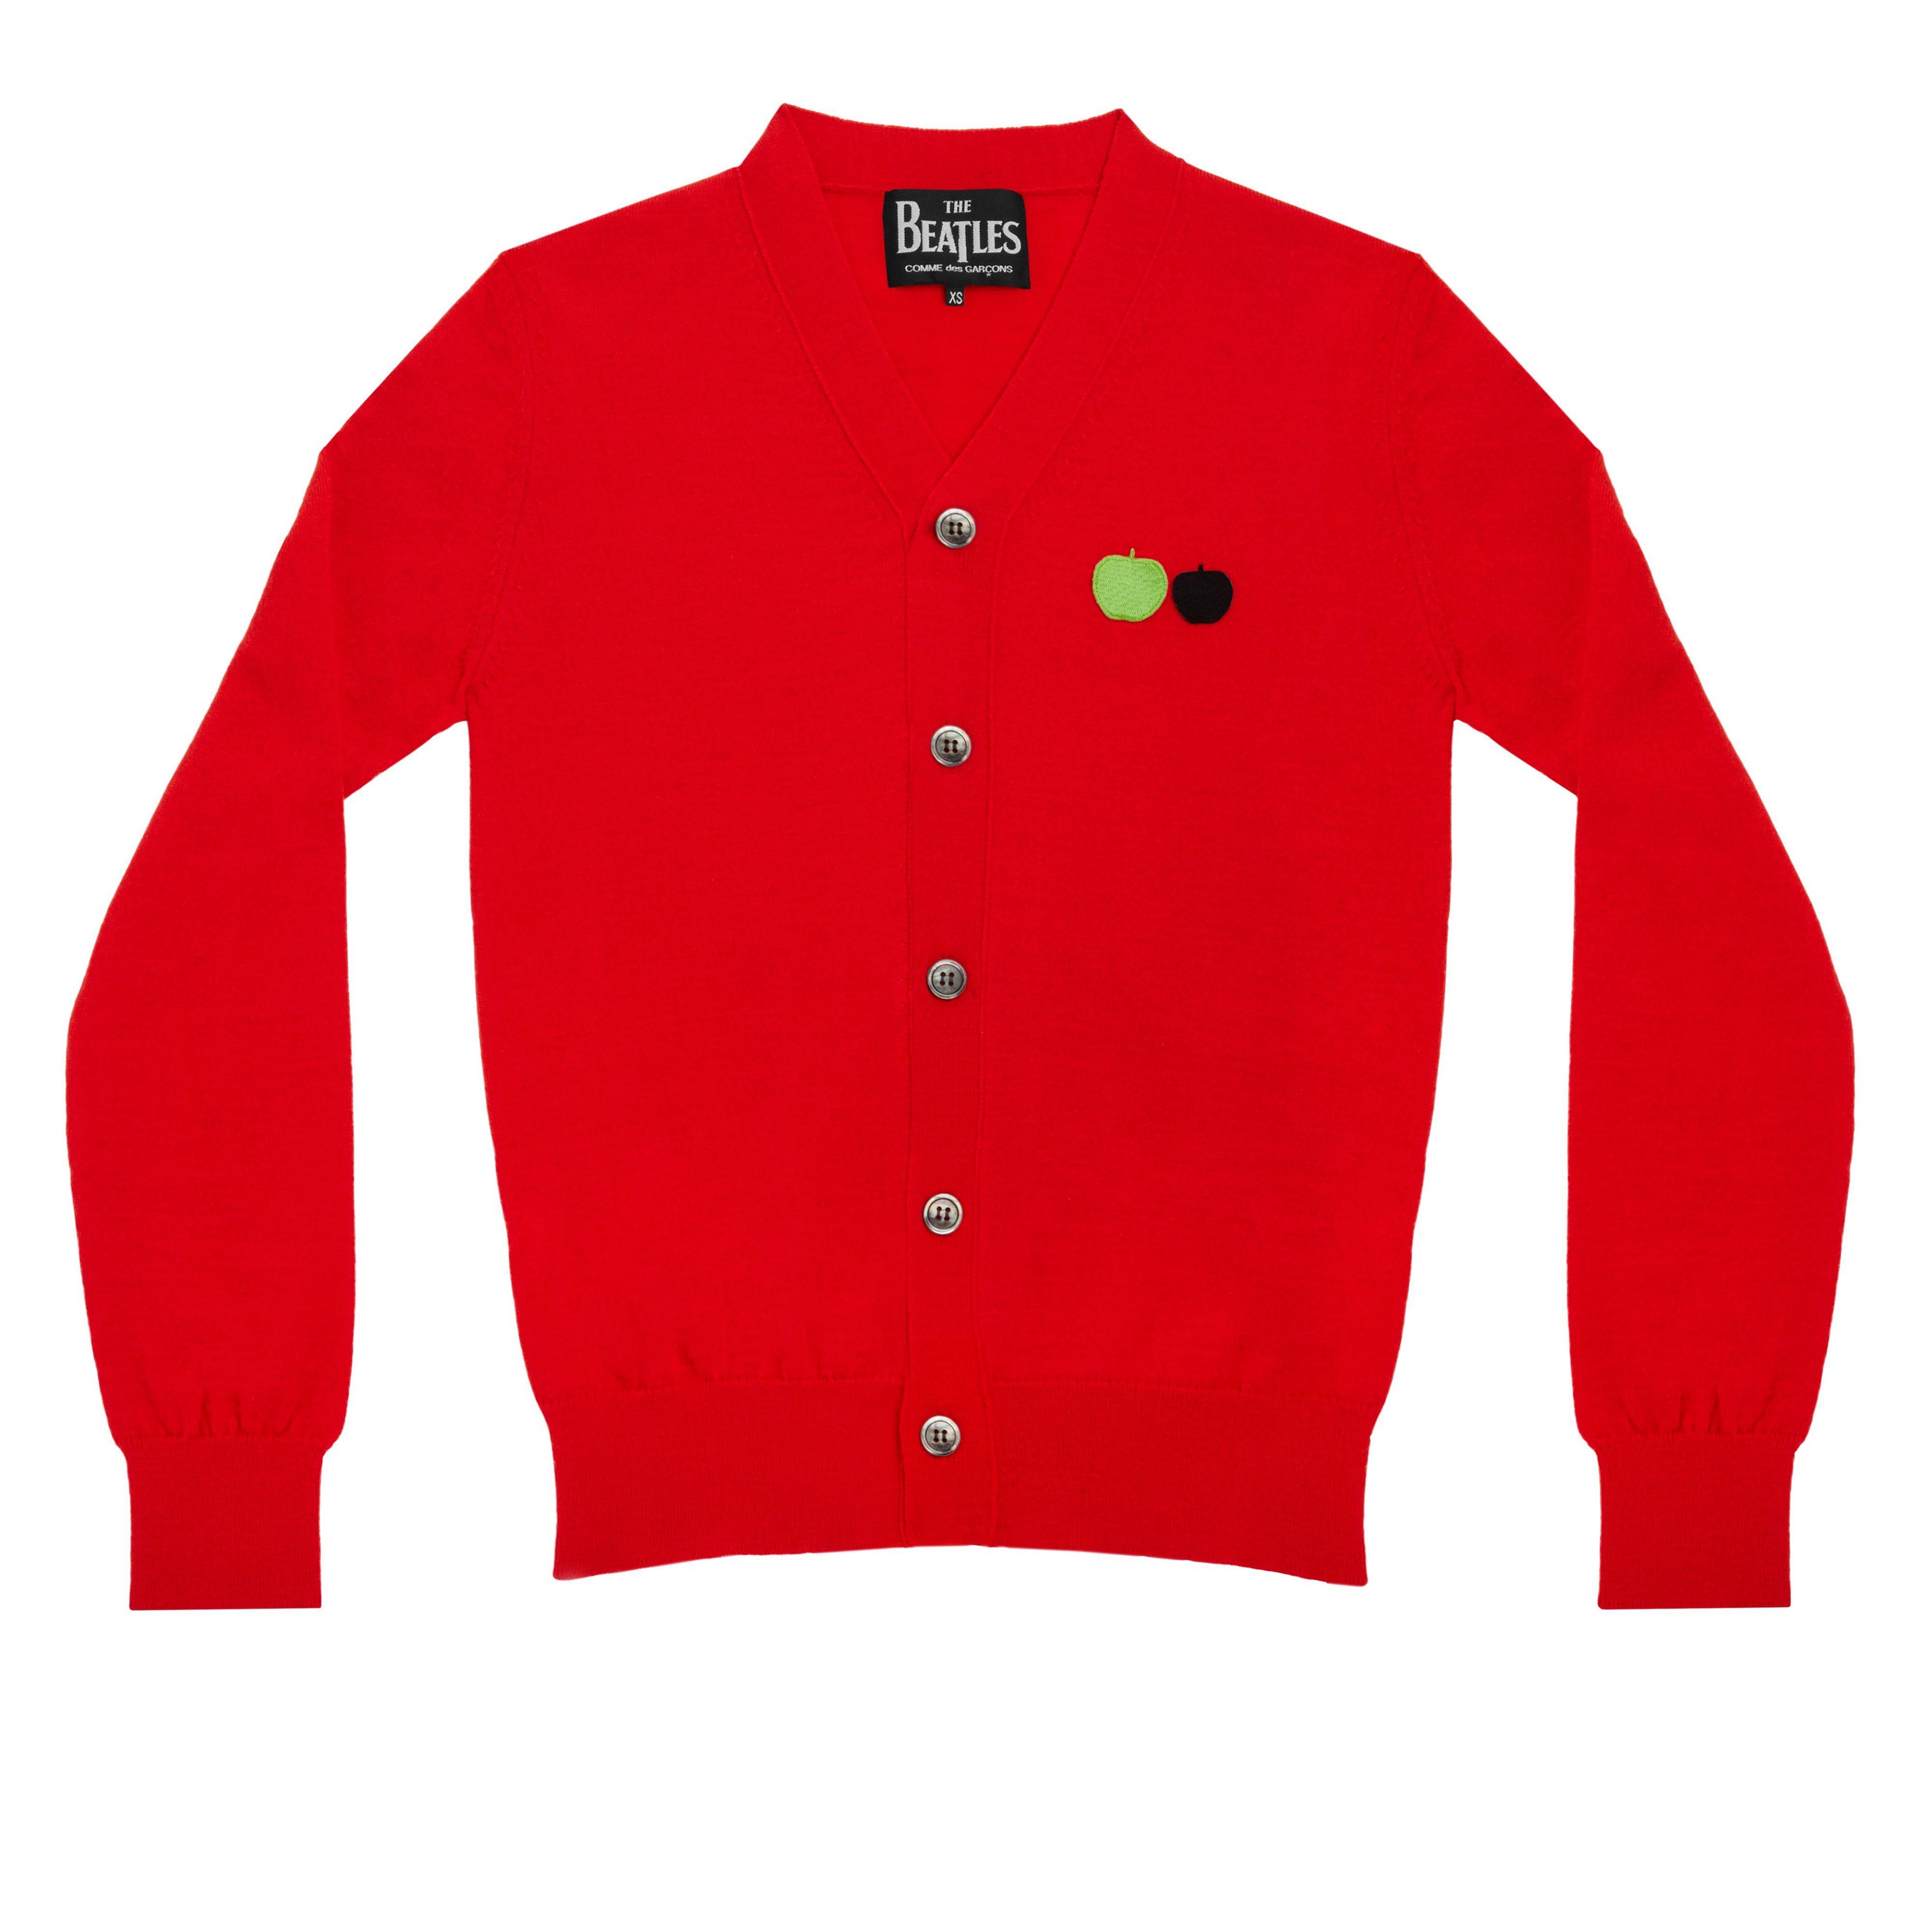 CDG Beatles - Unisex Cardgian - (Red) by COMME DES GARCONS